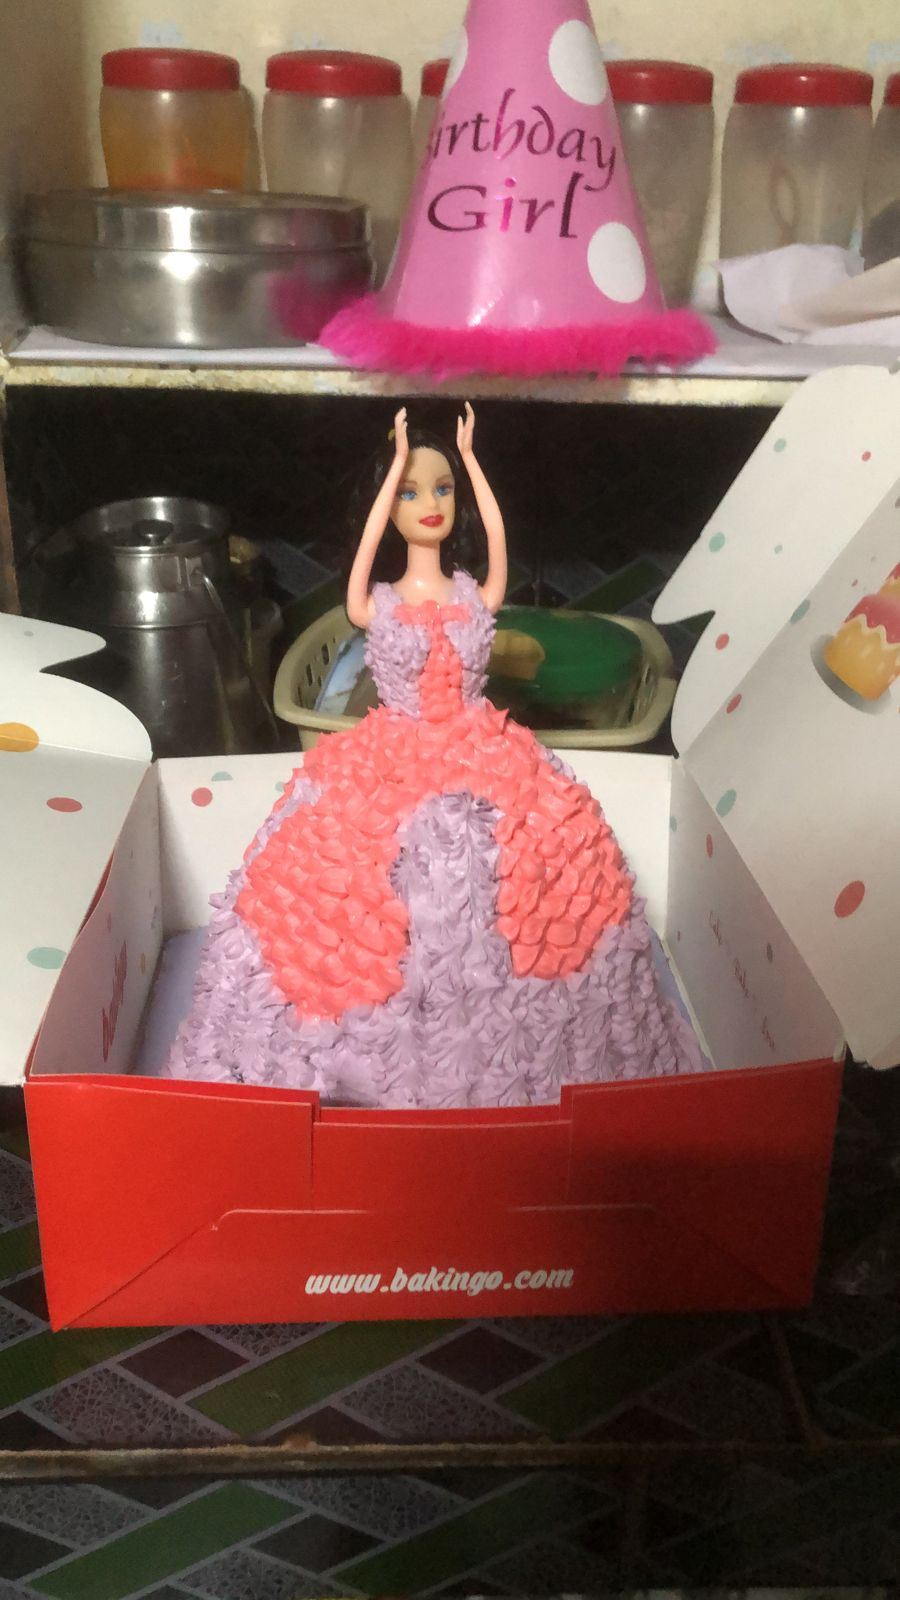 1960's Sindy Doll in a Box Birthday Cake | Susie's Cakes